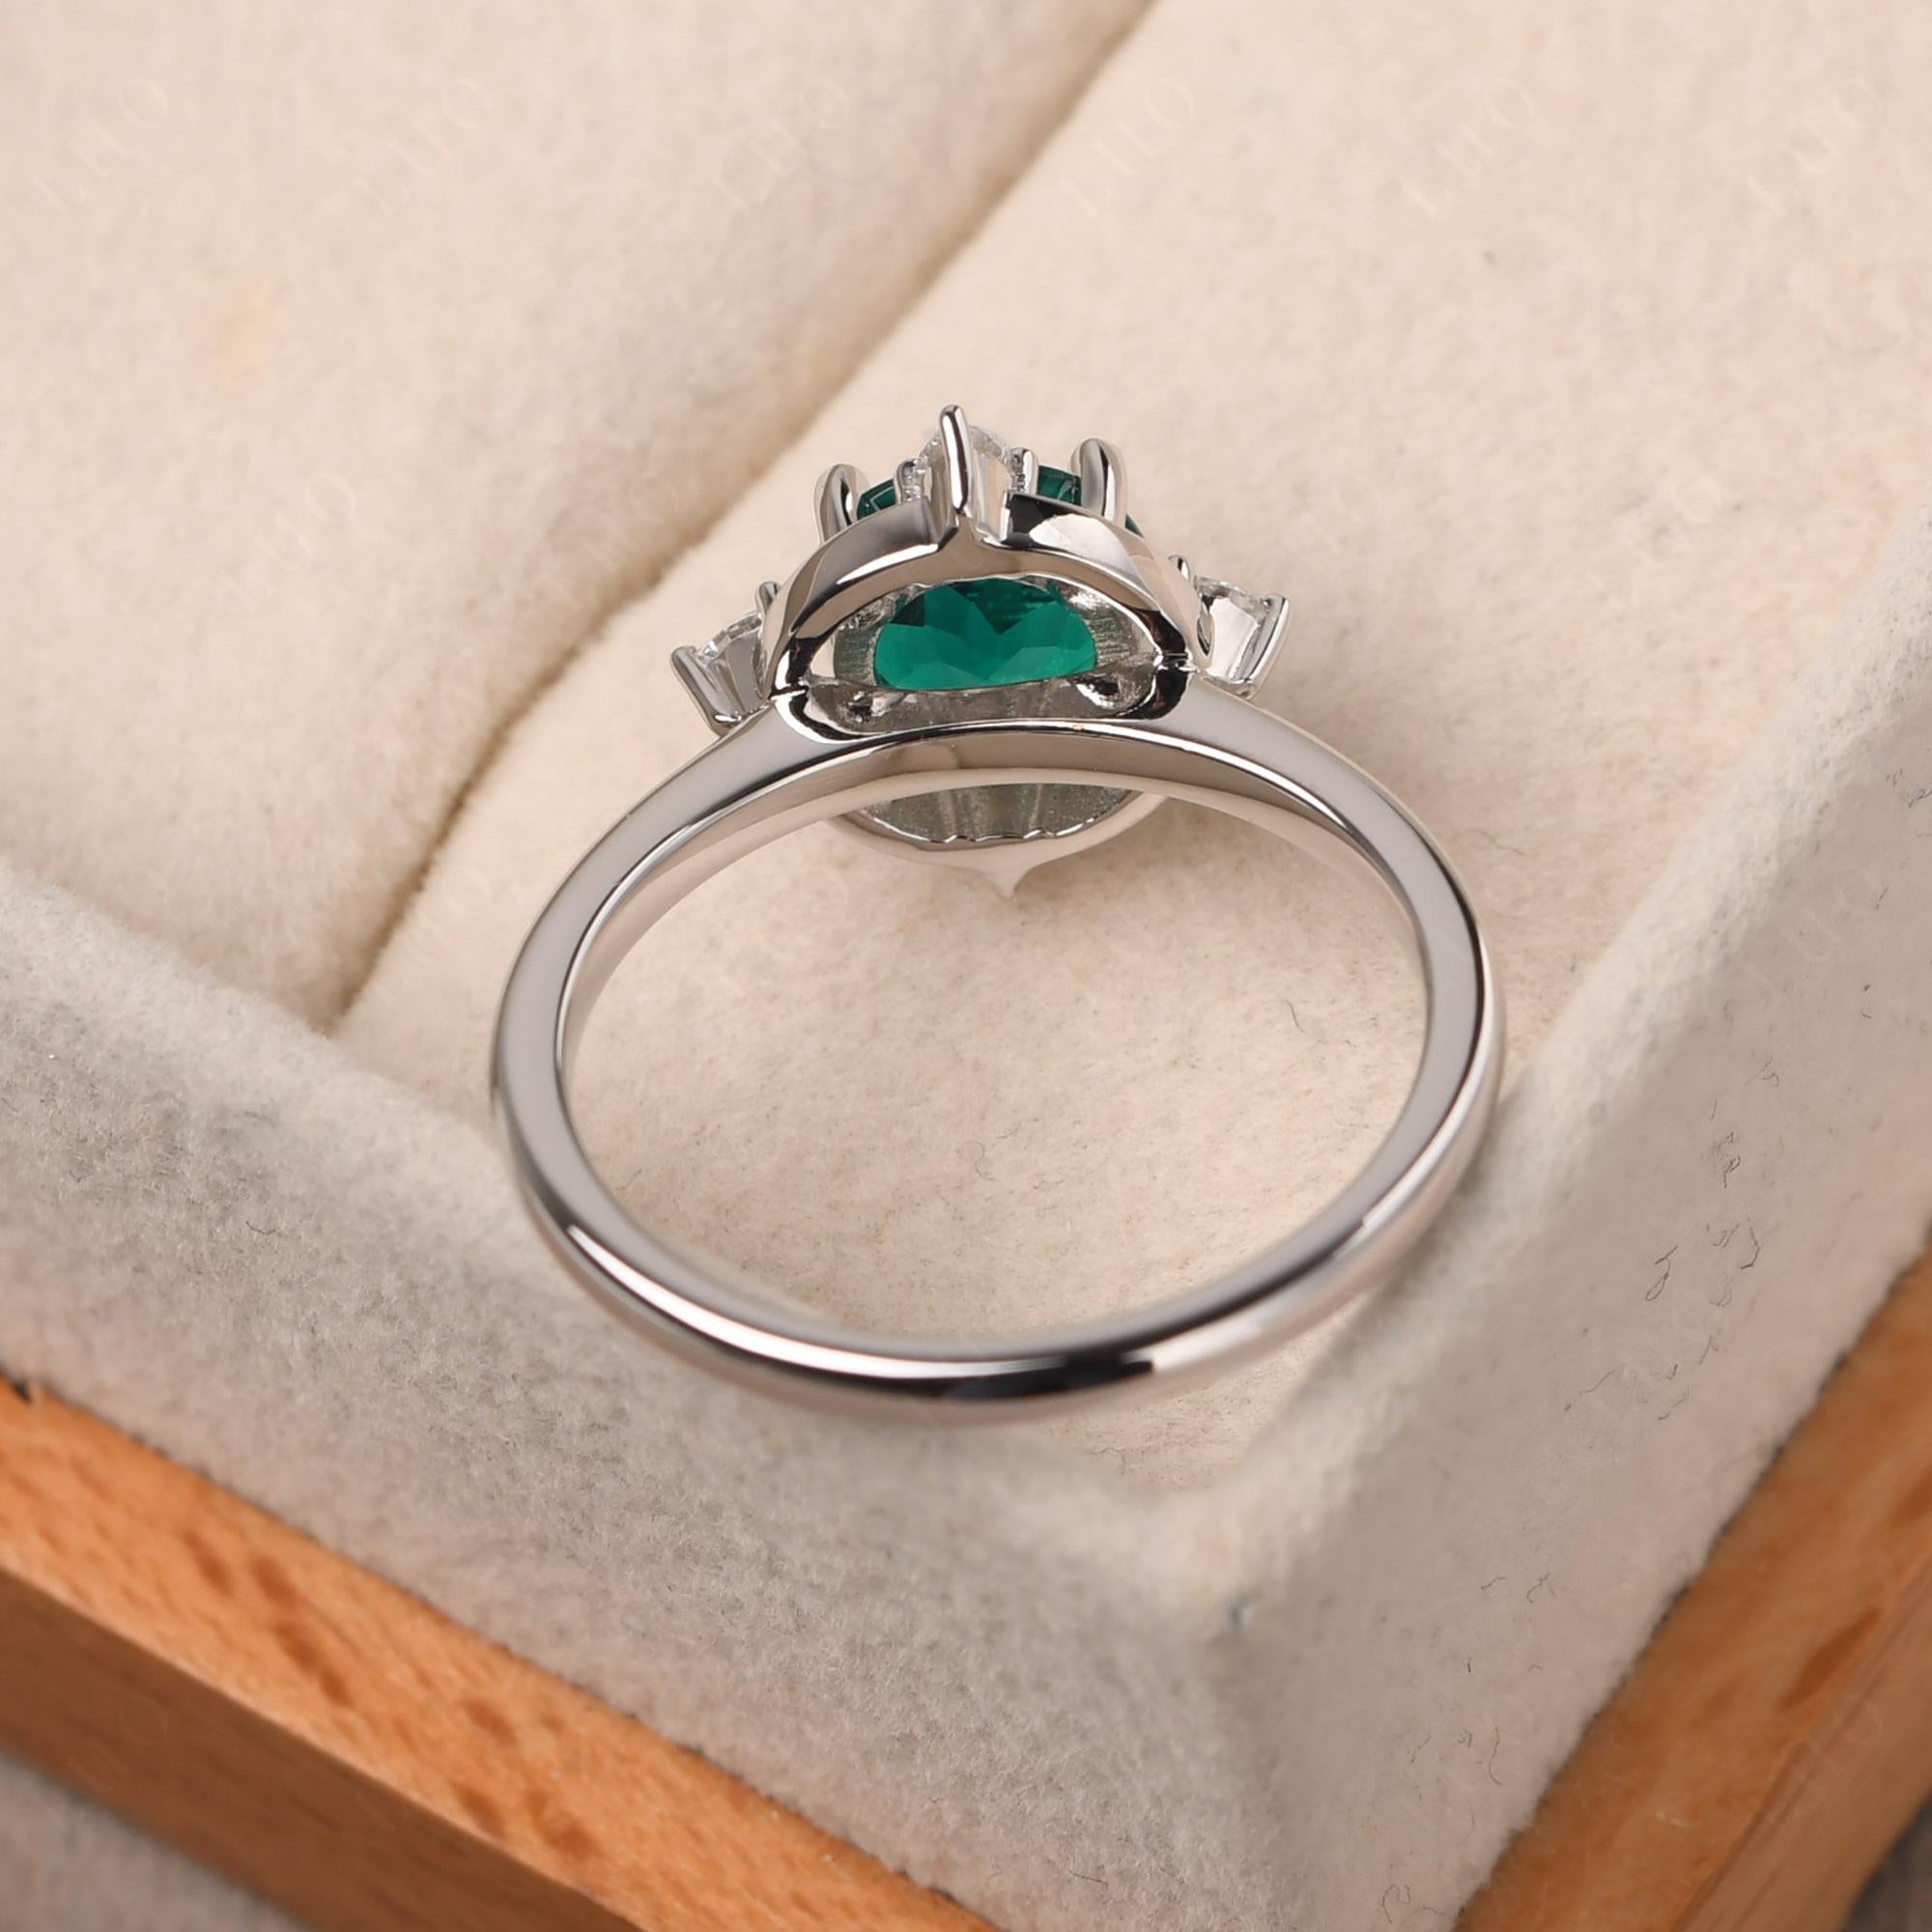 Emerald North Star Engagement Ring - LUO Jewelry